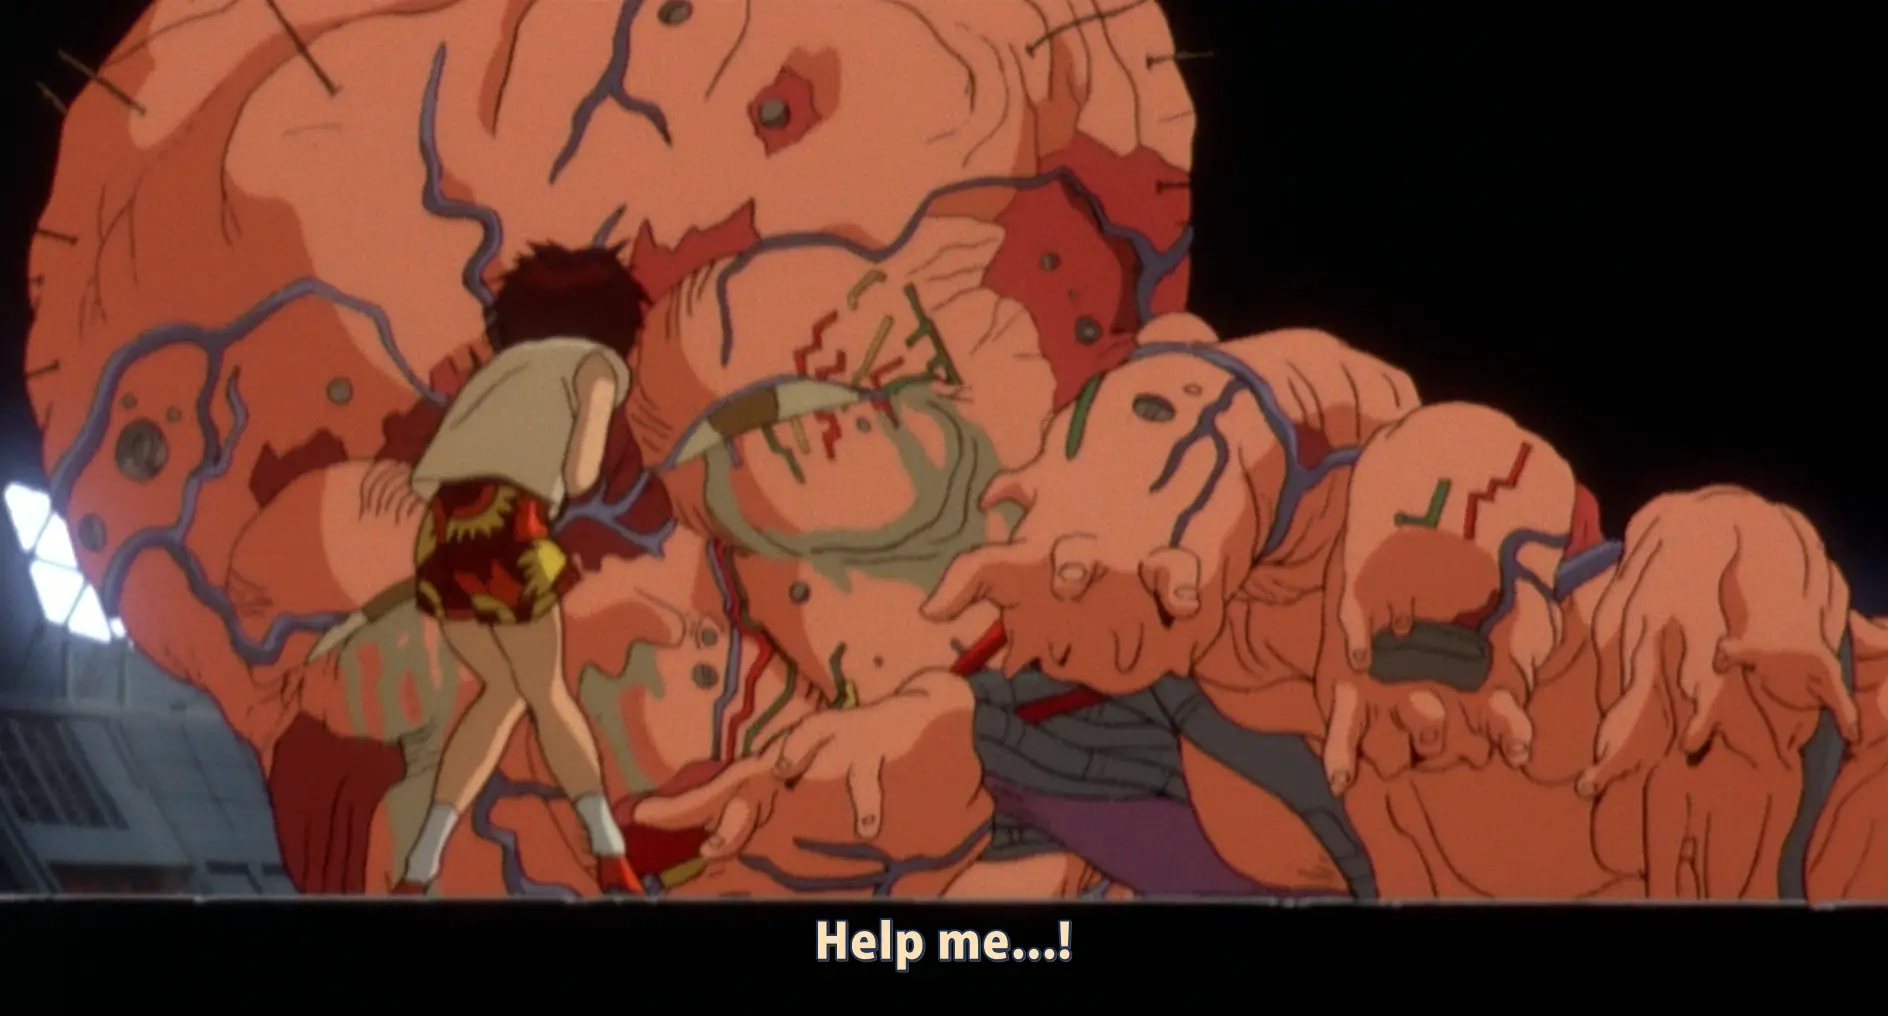 Still from Akira. Tetsuo is now a huge mass of flesh, grasping with a huge hand. Tiny fingers poke out the ends of his larger fingers. Knots of wires can be seen here and there within the flesh. He begs for help. In the foreground, Kaori stands frozen in fear, about to be engulfed.